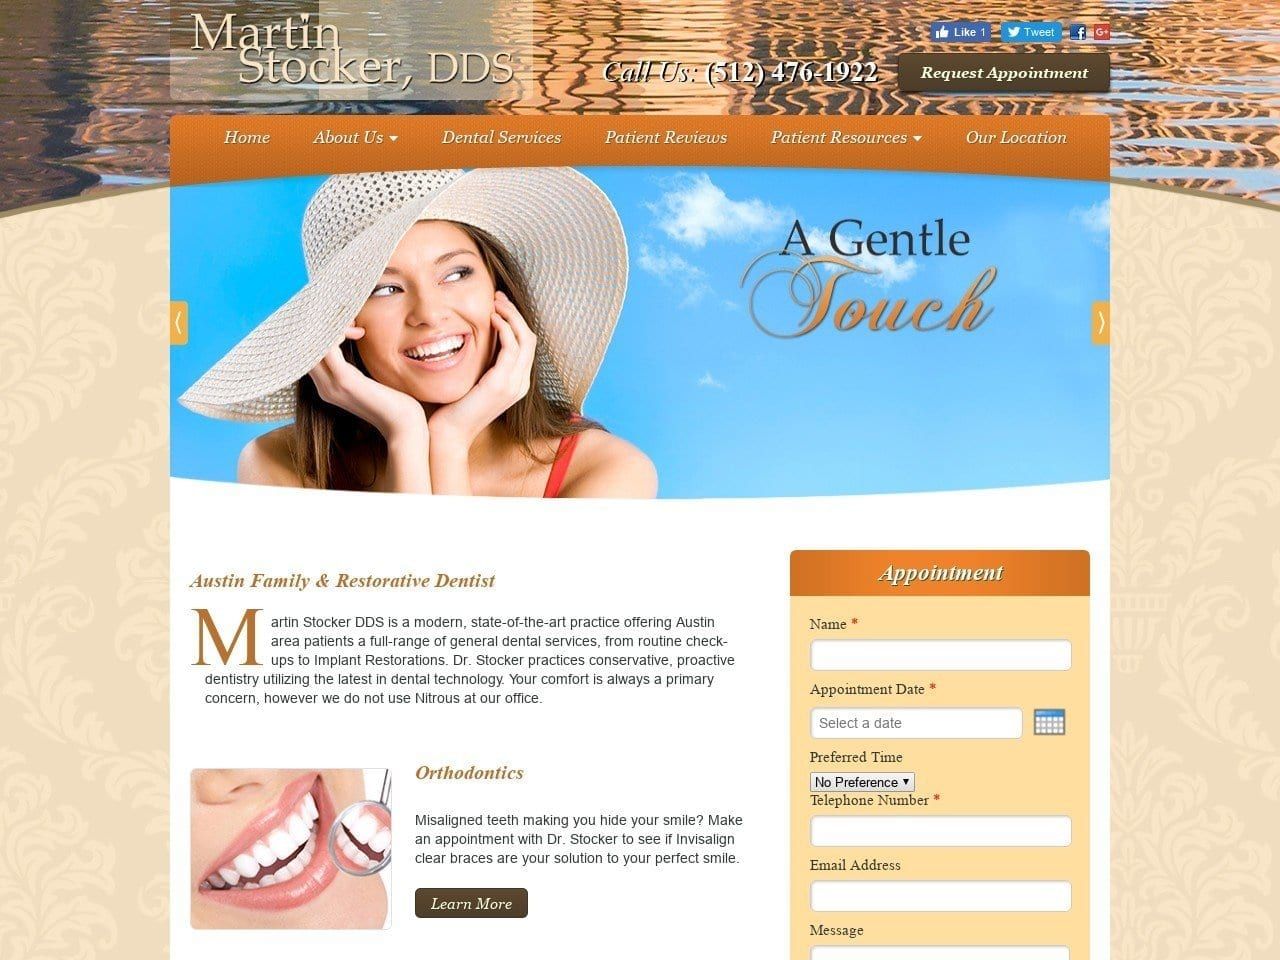 A Gentle Touch Website Screenshot from agentletouch.com